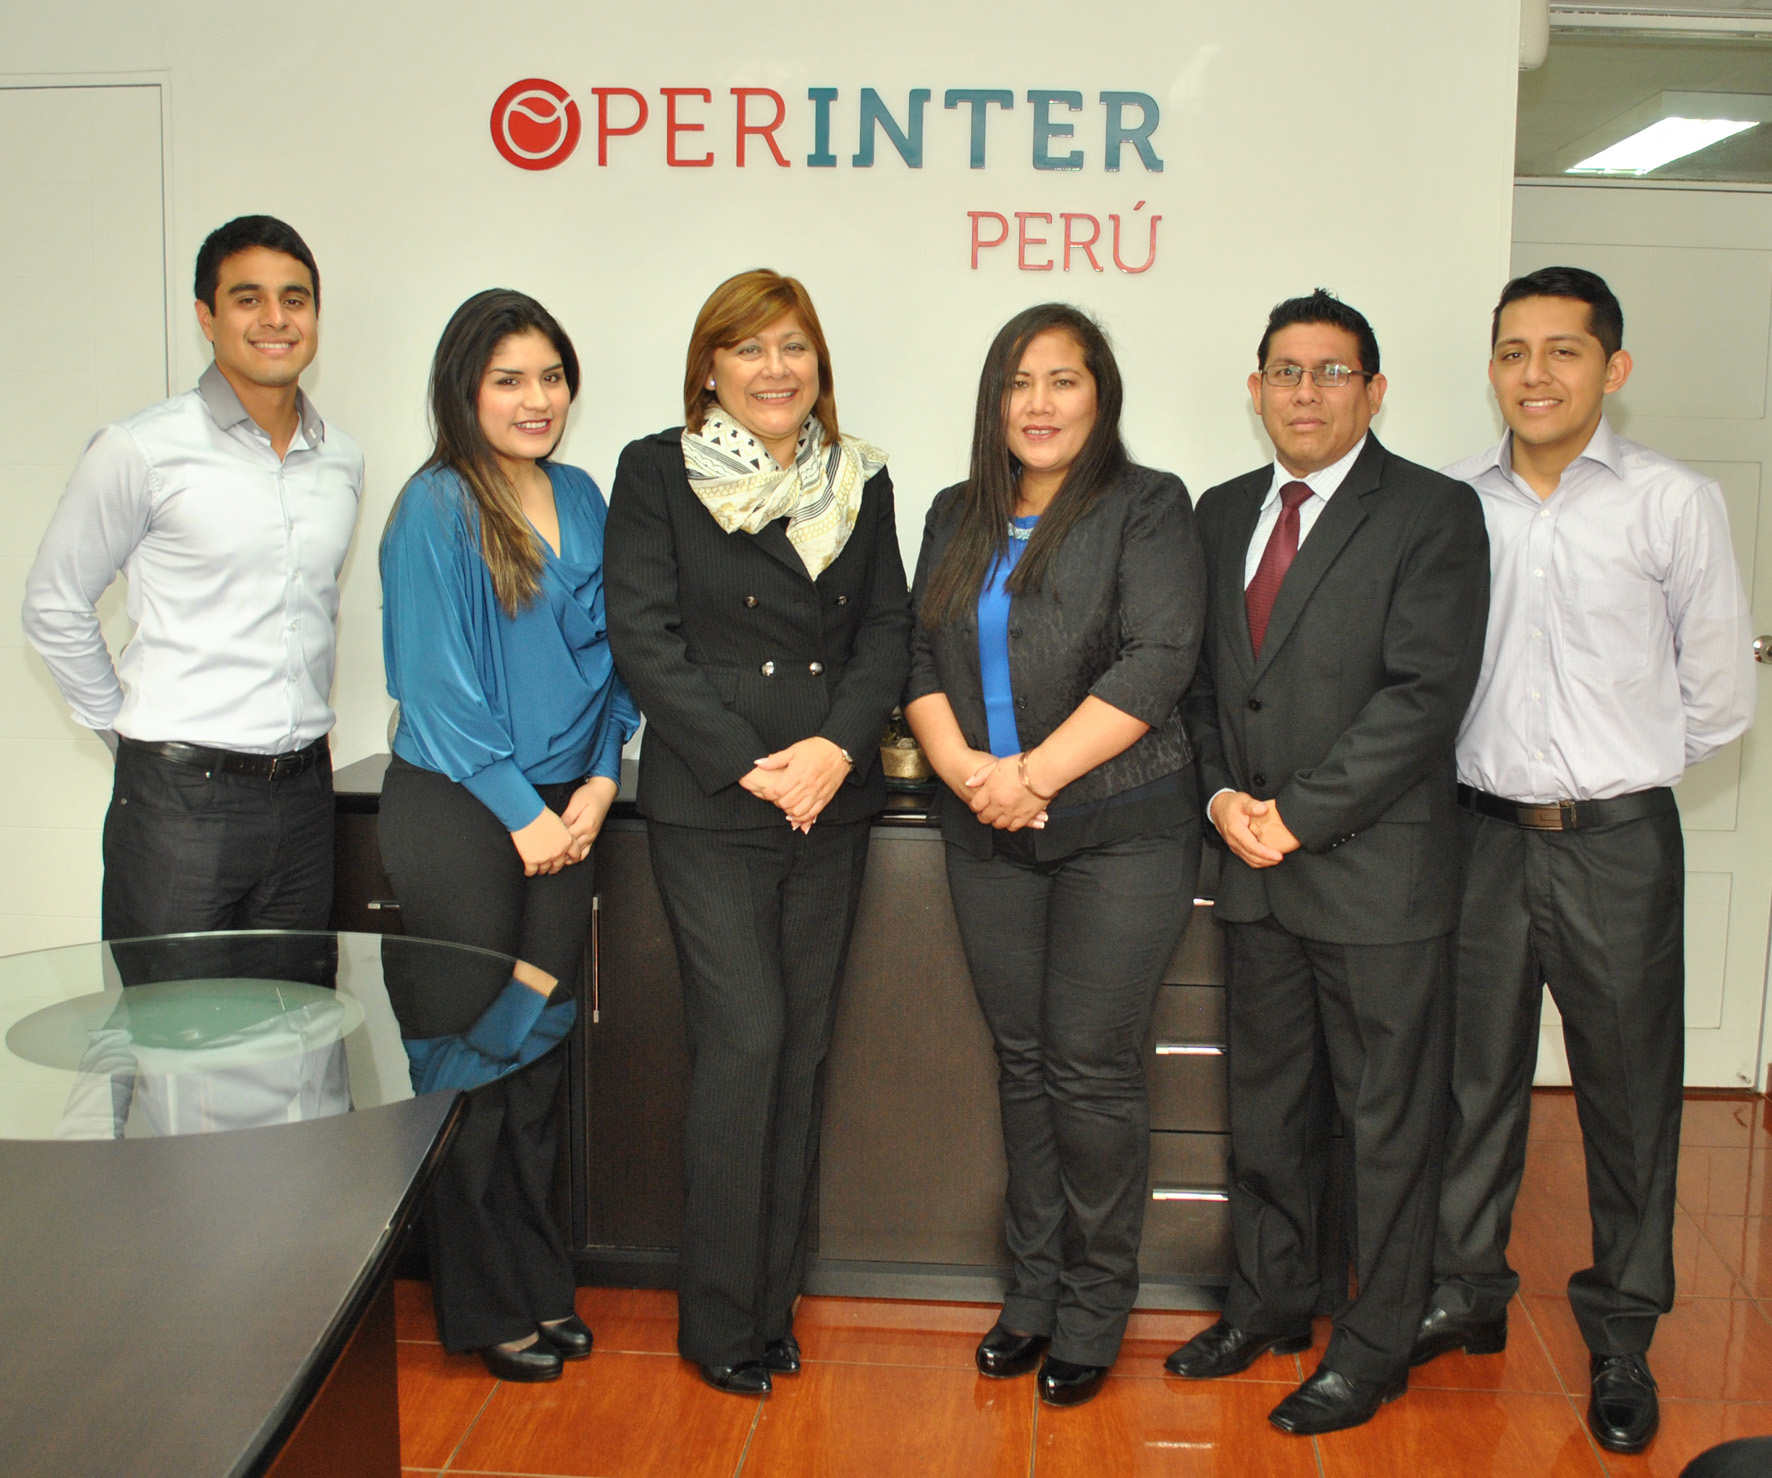 Operinter opens new offices in Spain and Peru